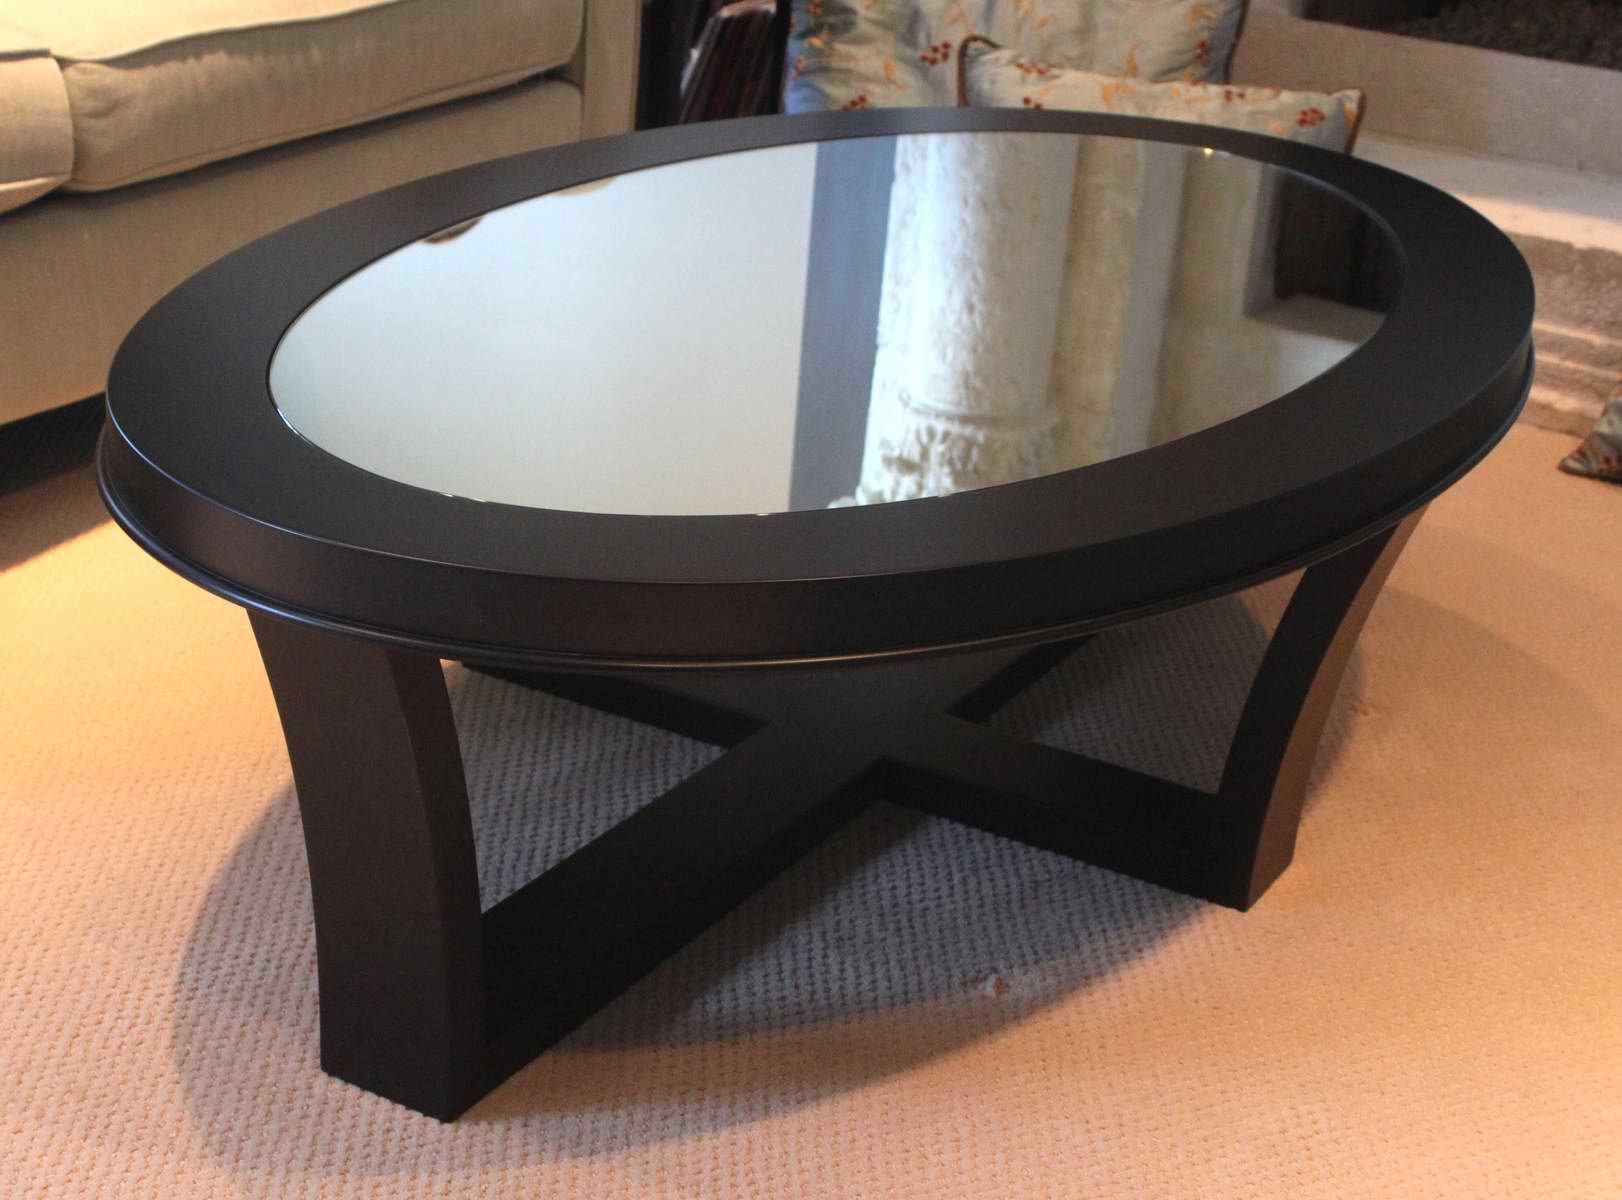 Small Black Glass Coffee Table Furniture Oval Glass Top Coffee Table With Storage And Wooden Base With Frame Painted With Wooden (View 4 of 10)